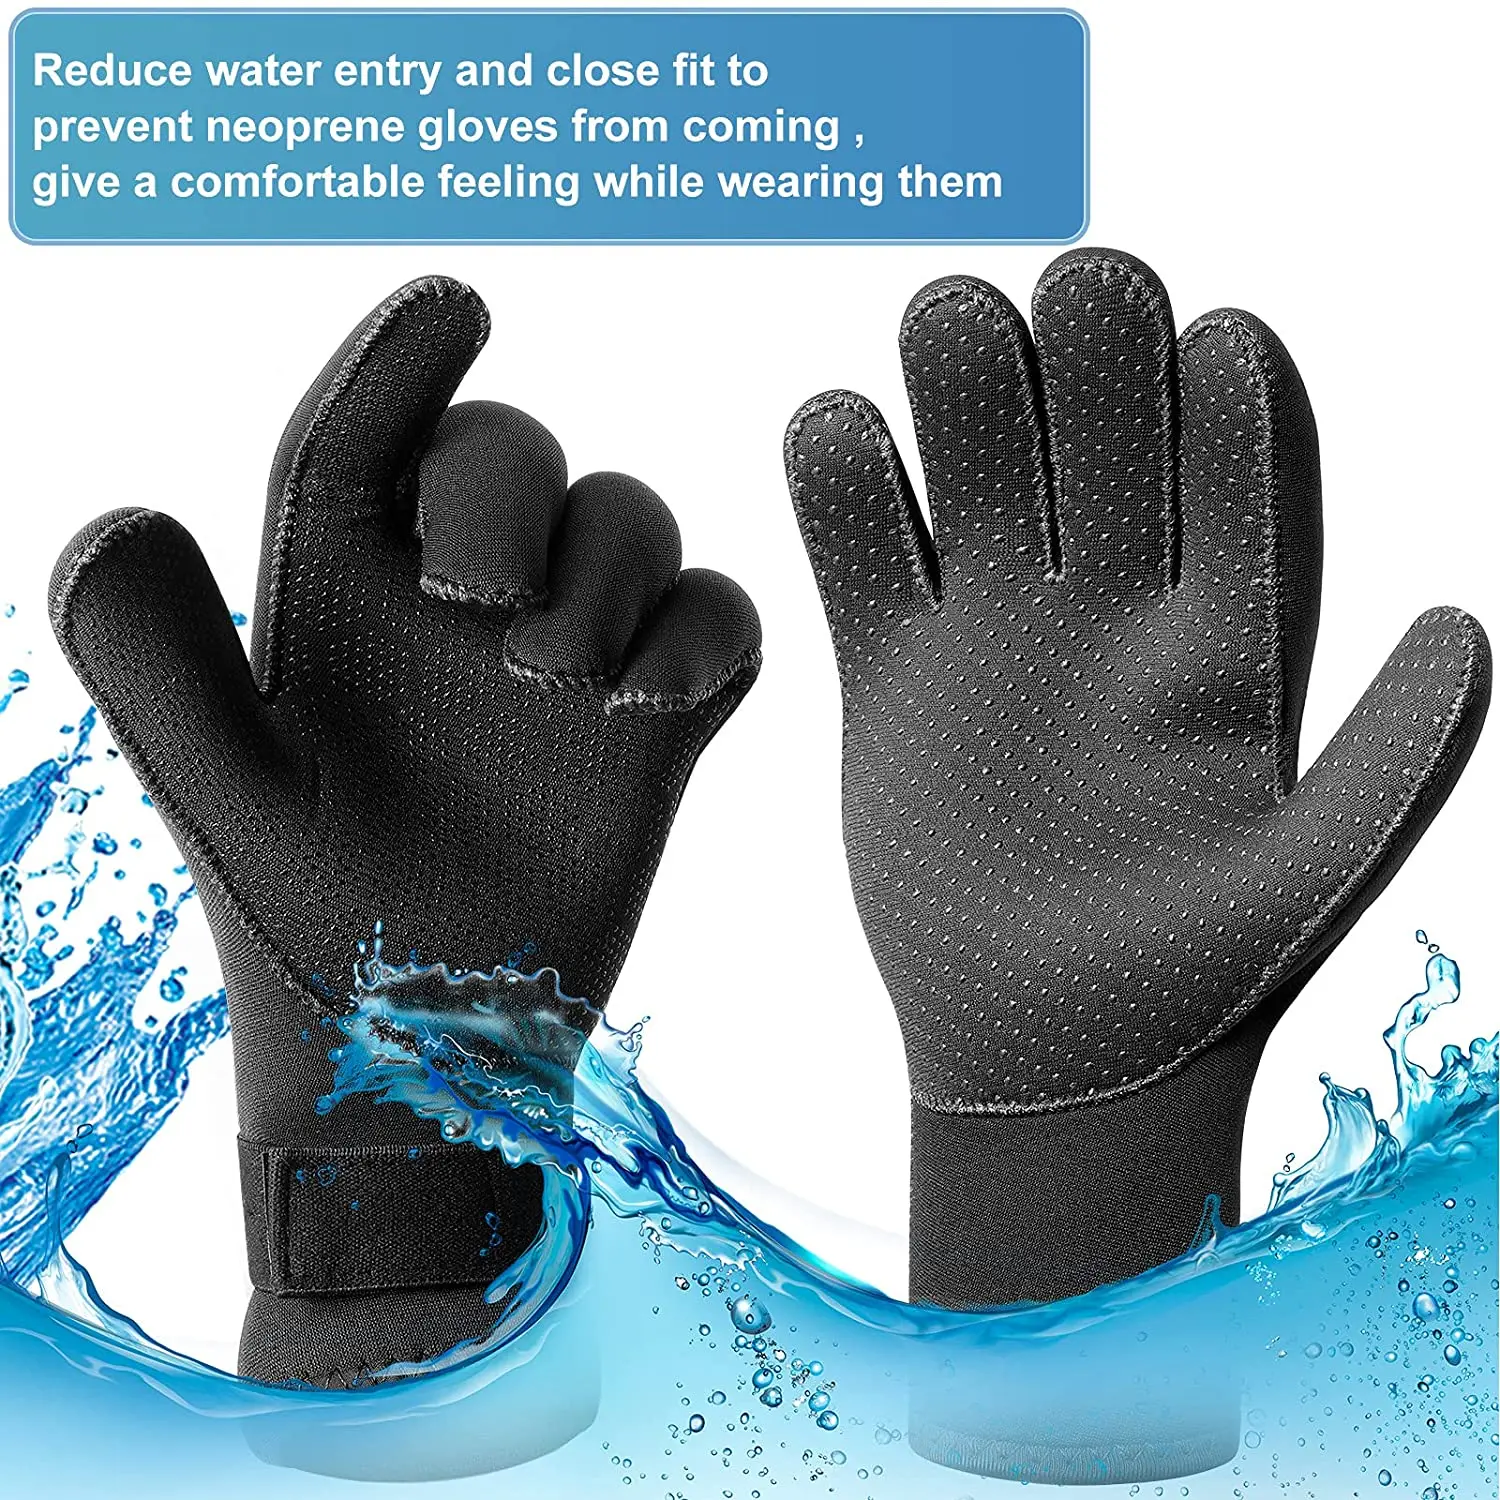 Thermal Anti Slip Flexible Dive Water Gloves Neoprene Scuba Surfing Wetsuit Diving Gloves with Adjustable Waist Strap